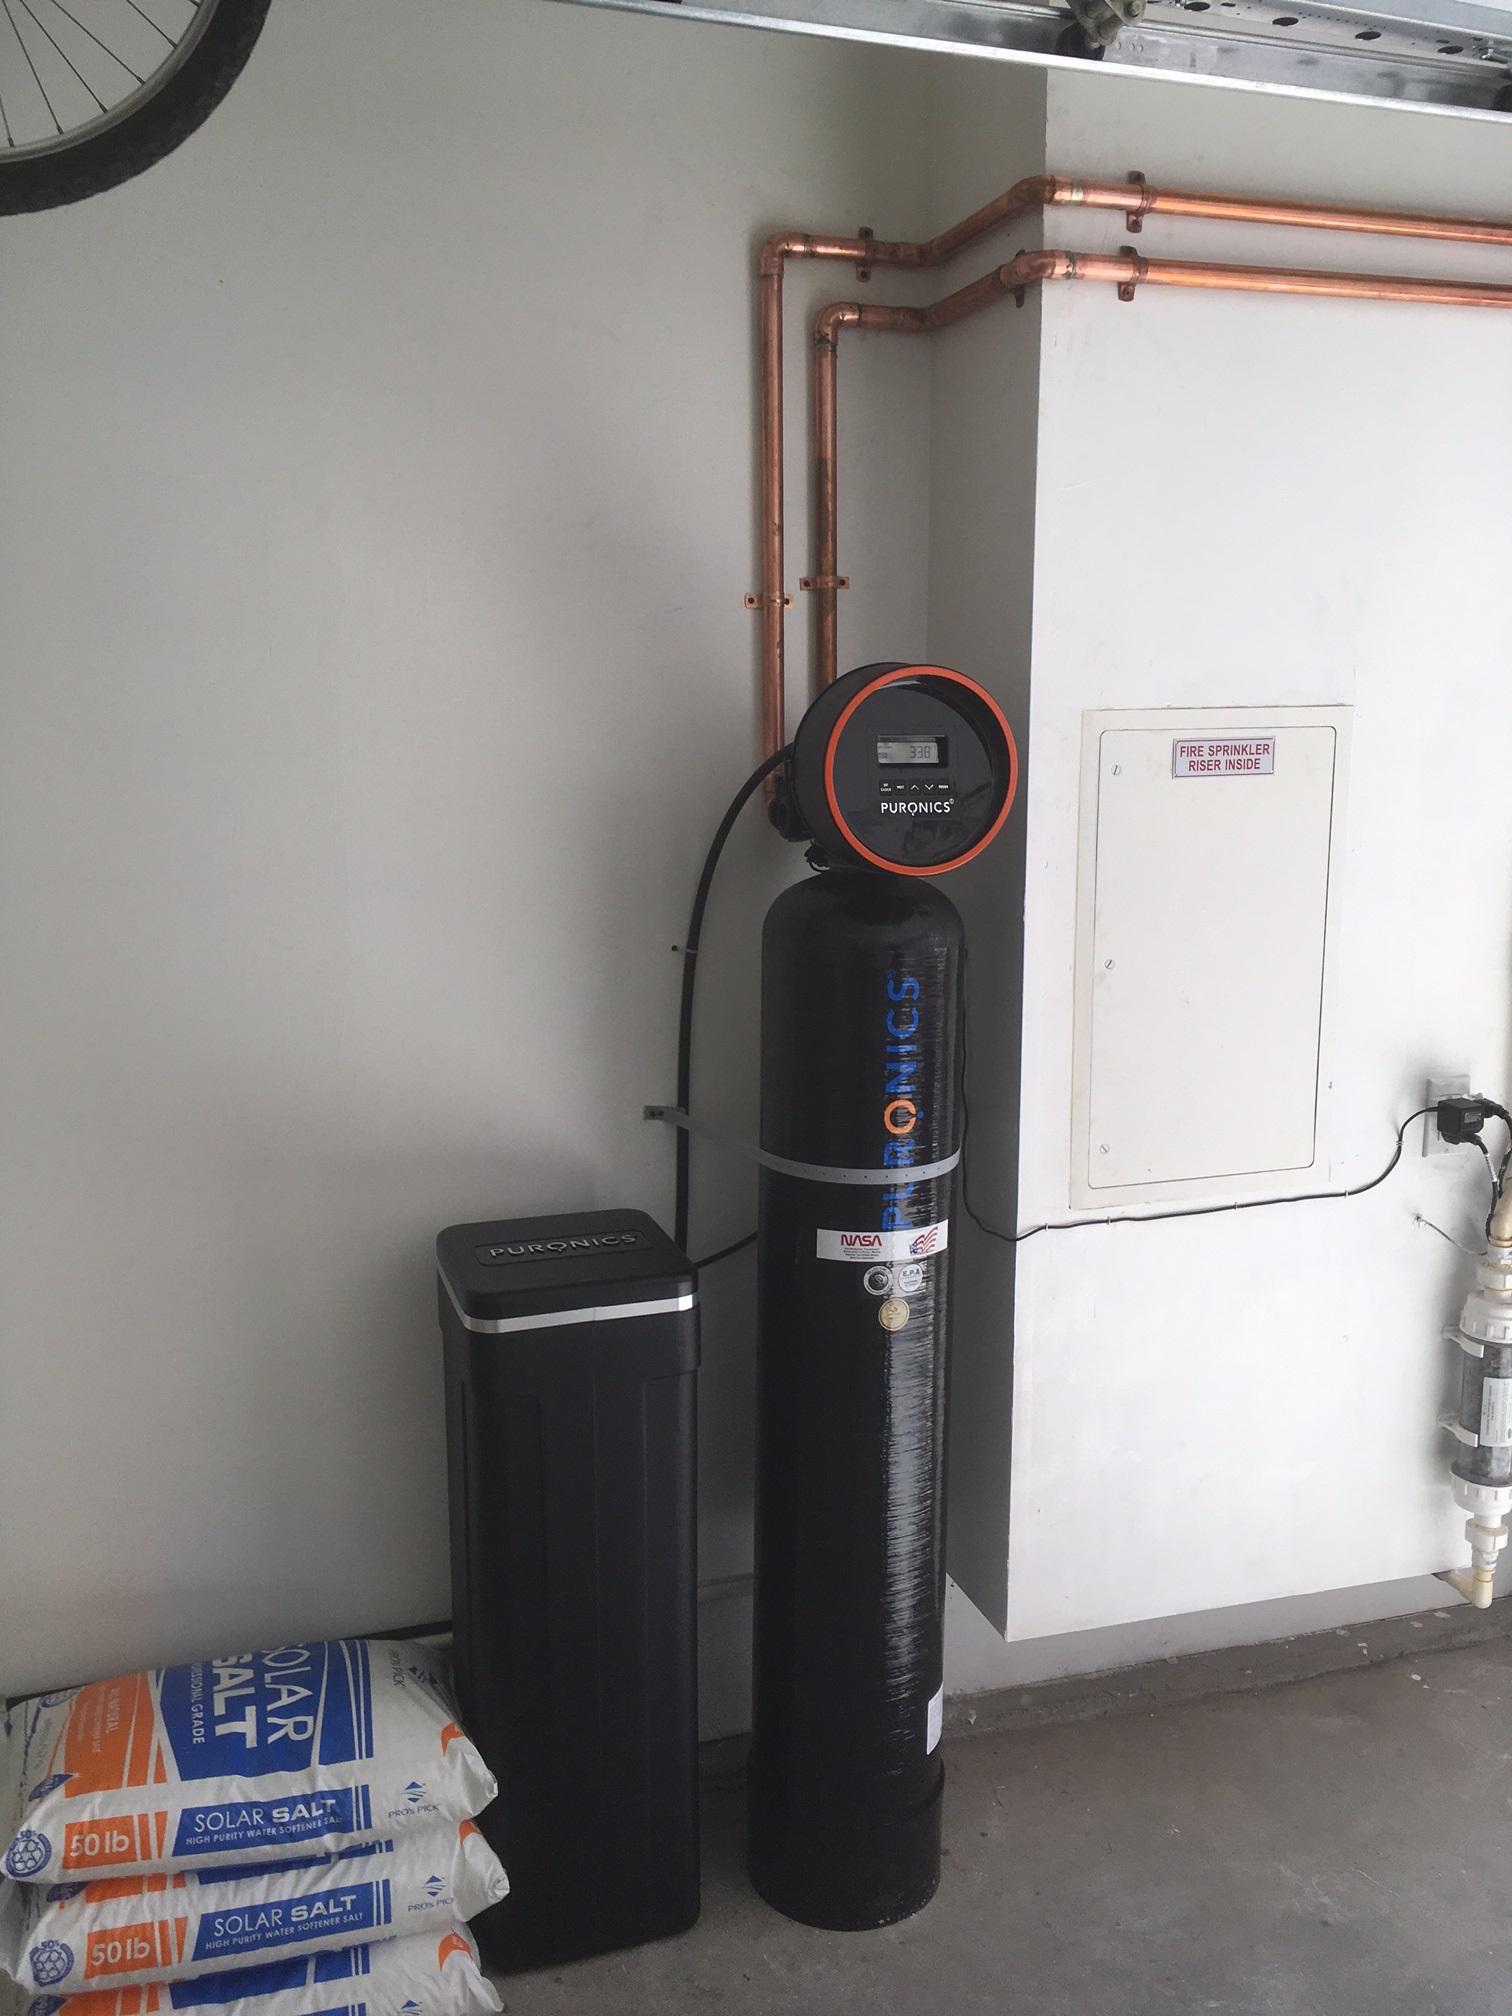 Picture of Puronics installed this Defender® whole-house water treatment system with a fiberglass tank in a customer's home. - Puronics, LLC